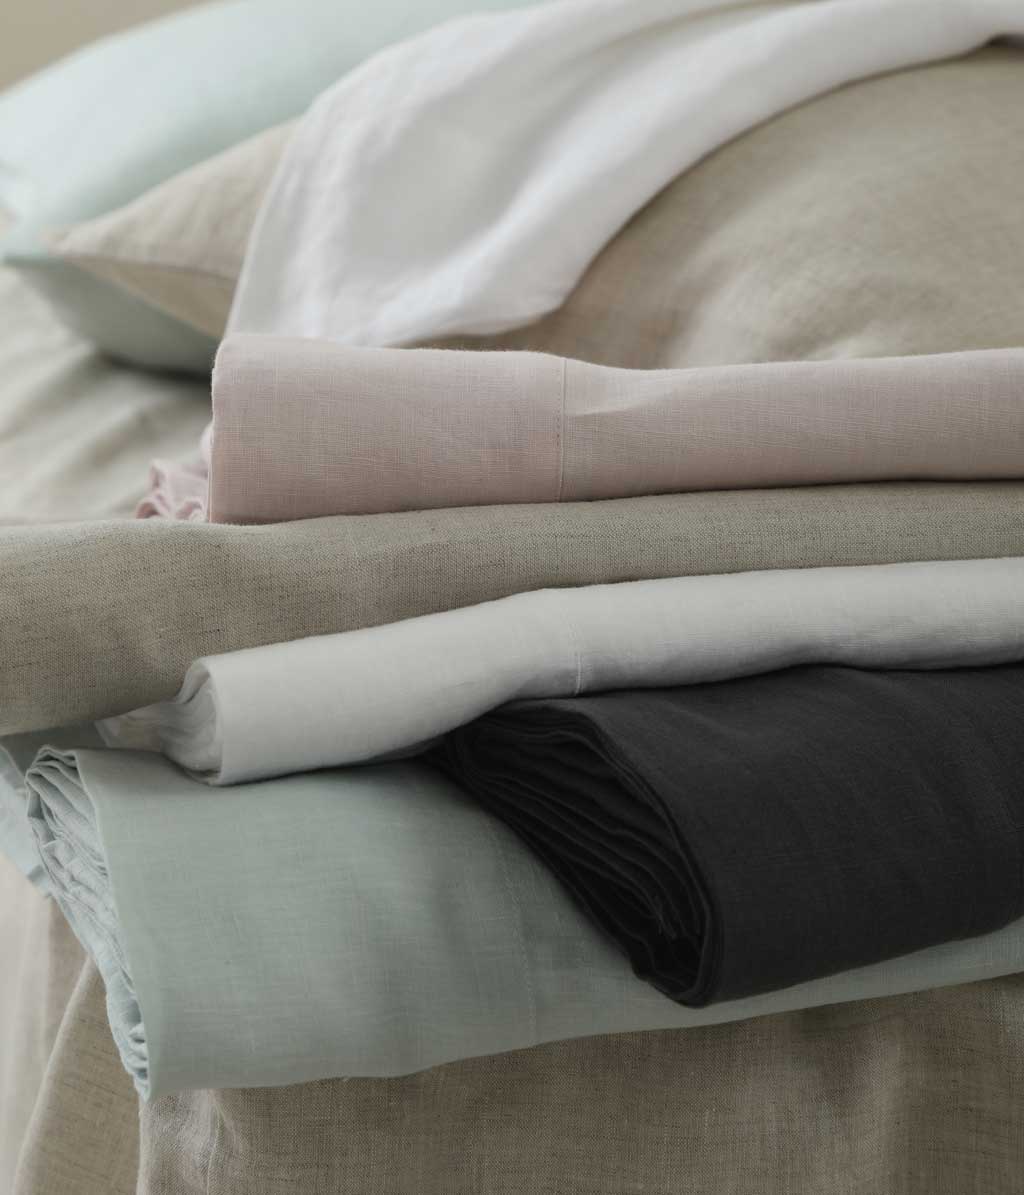 Laundered Linen White Fitted Sheet Set